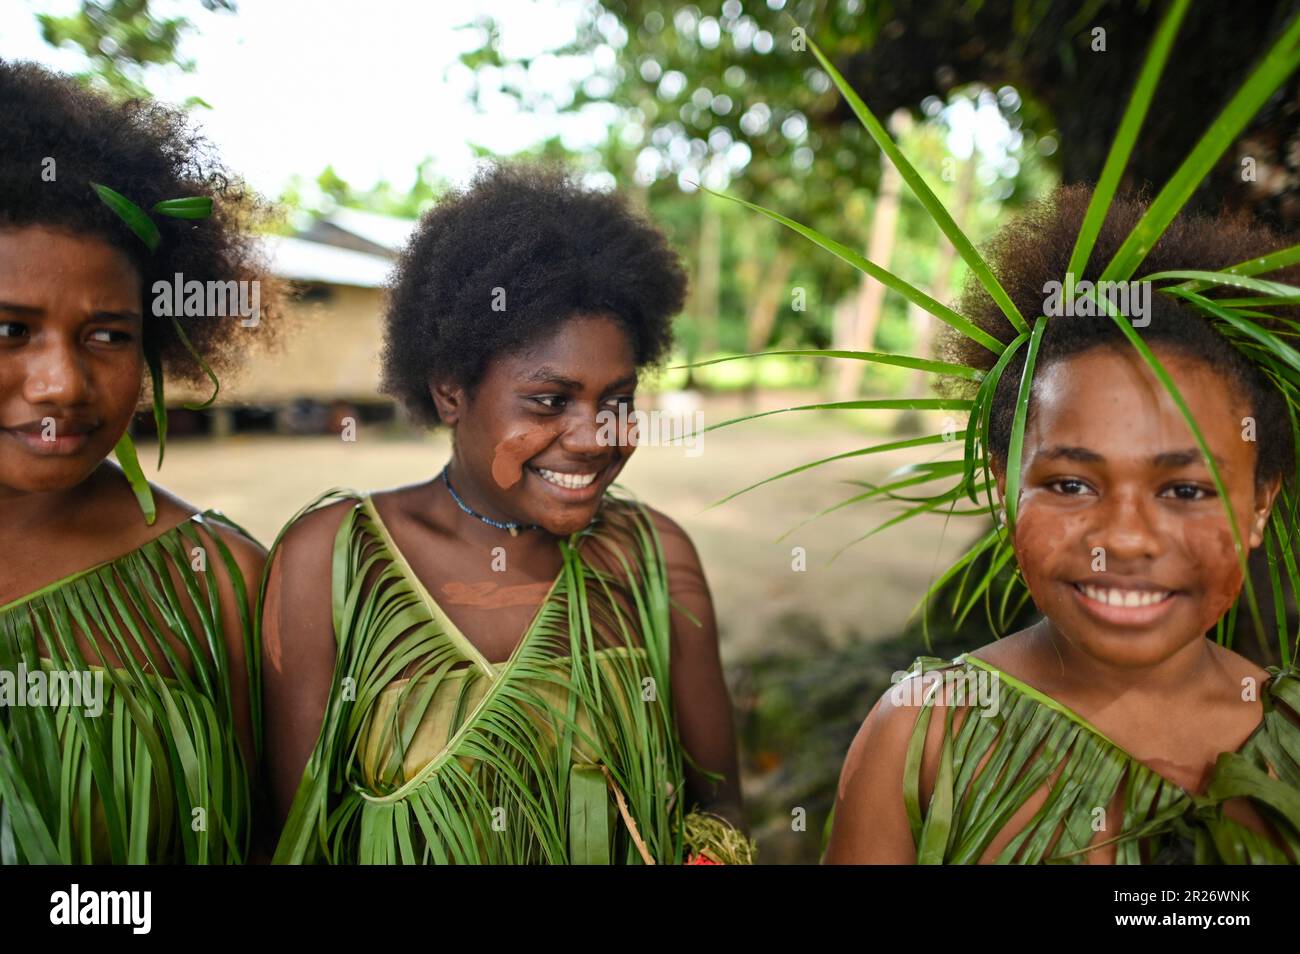 Indigenous teens of the Solomon Islands dressed in traditional outfits. Stock Photo